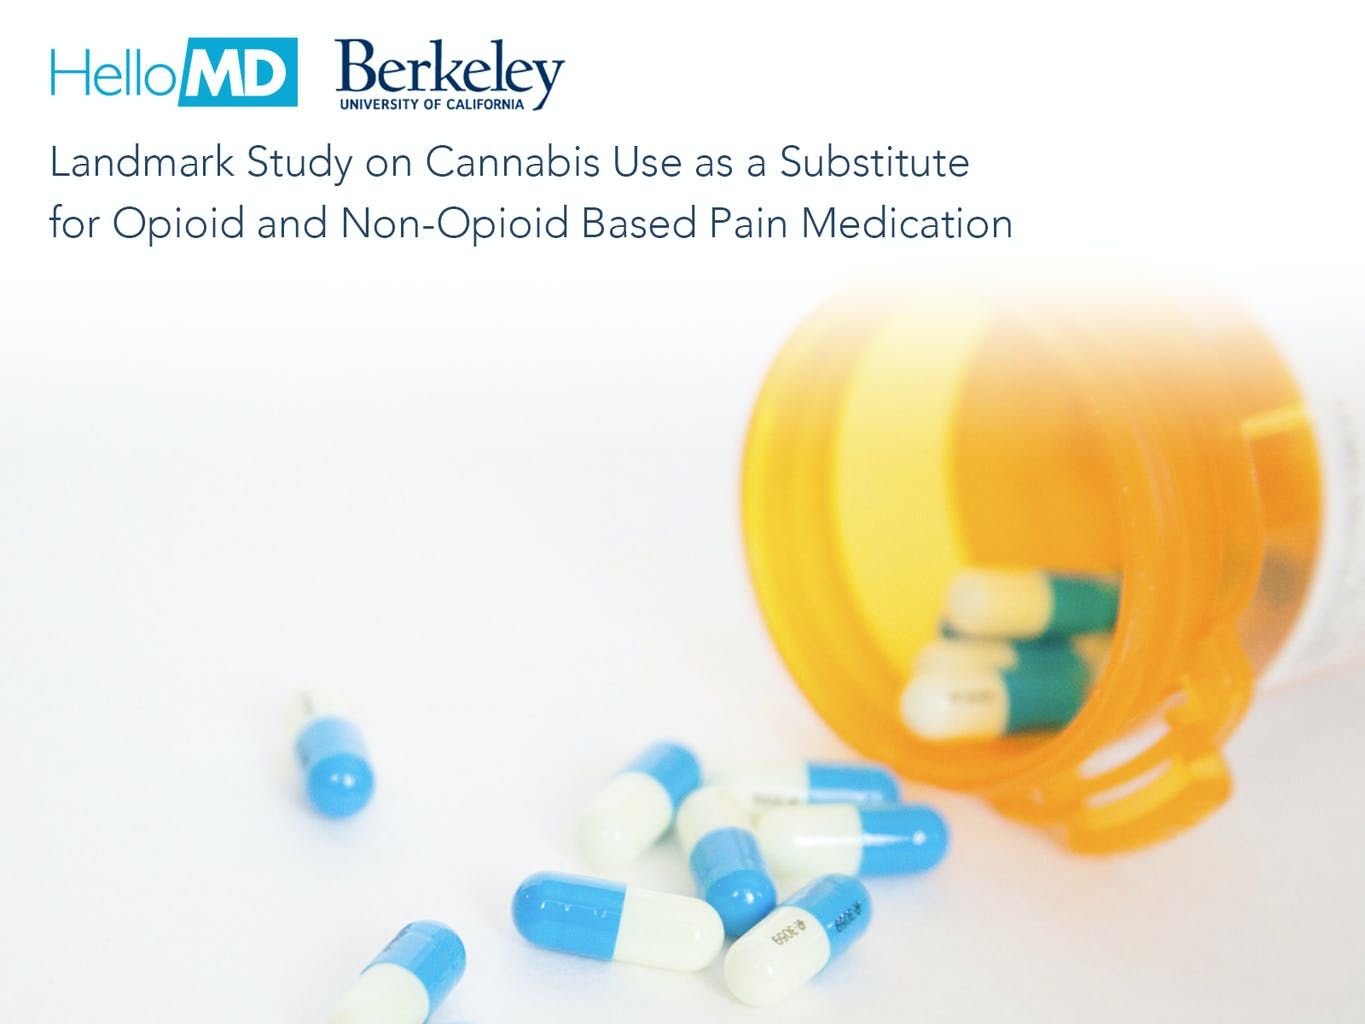 hellomd_and_uc_berkeley_release_study_on_cannabis_use_as_a_substitute_for_opioid_and_non_opioid_based_pain_medication_17253723c8